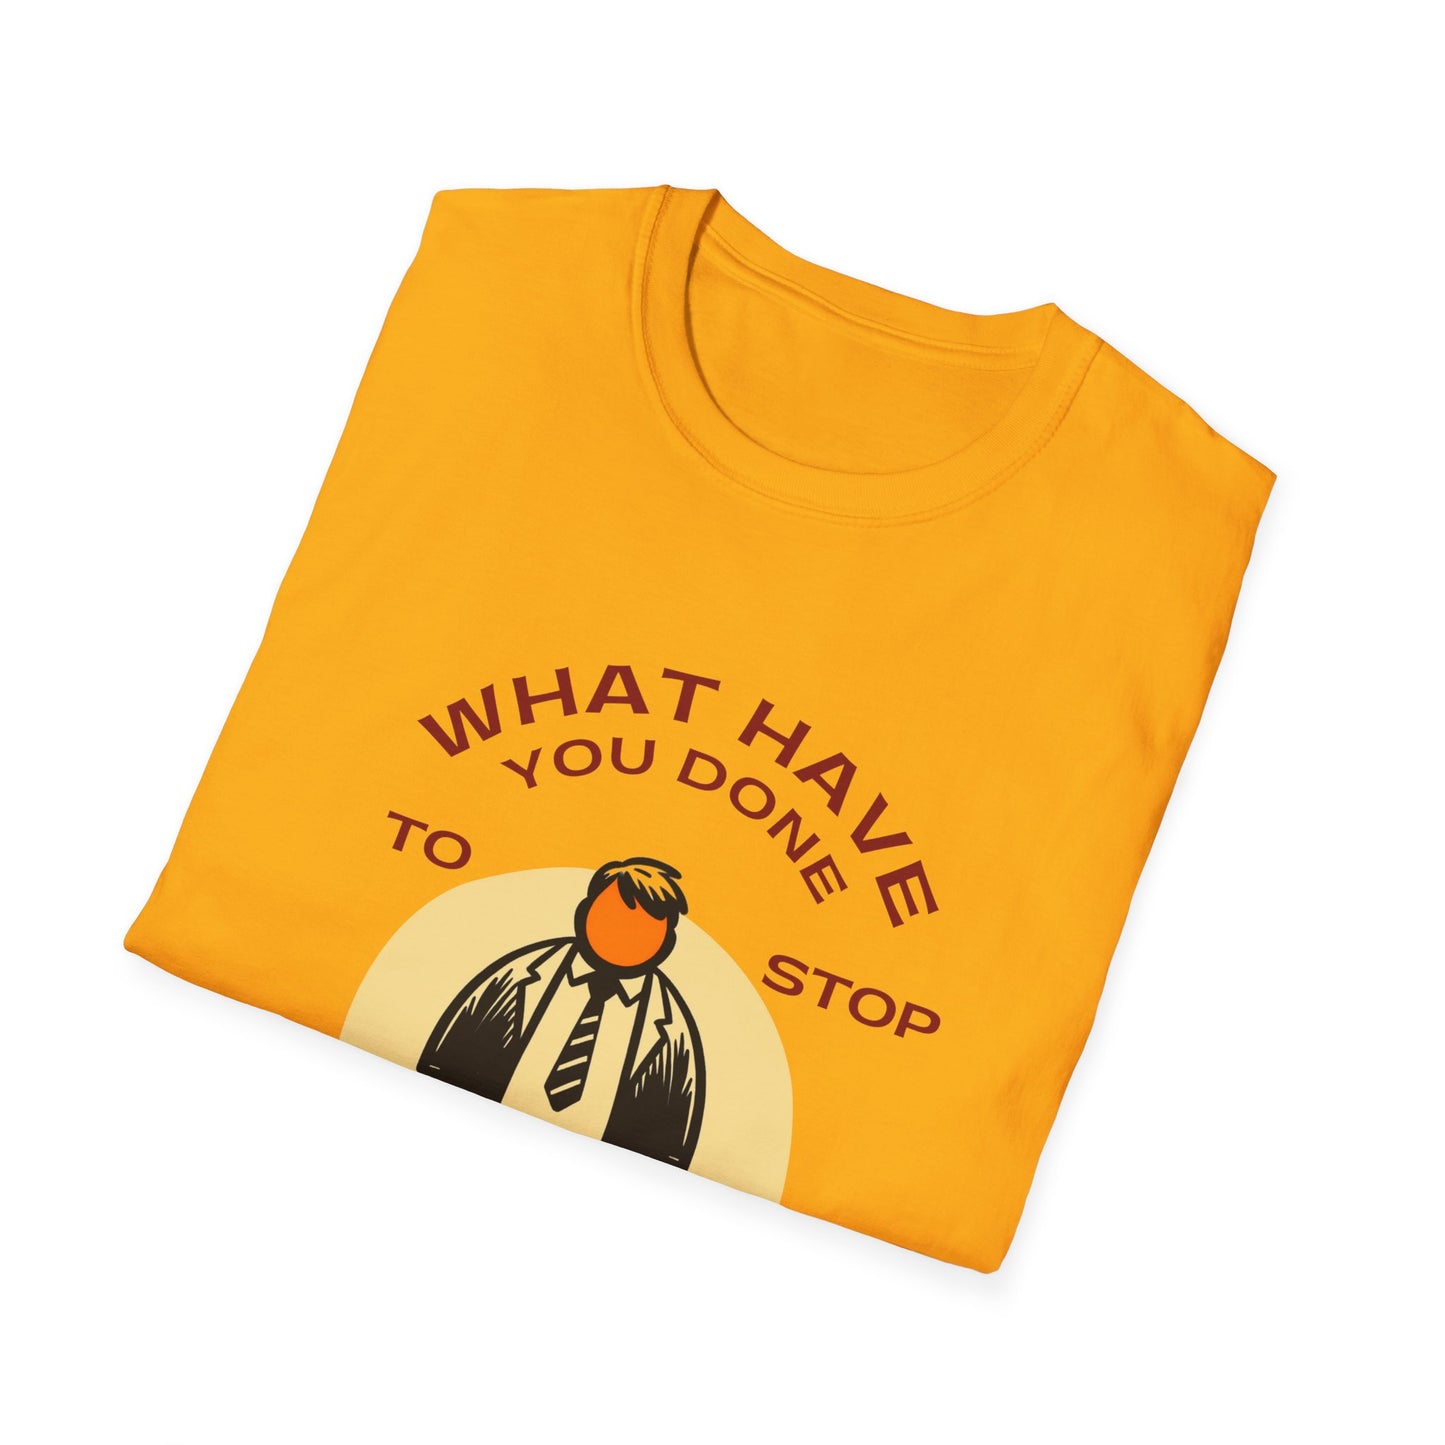 What Have You Done to Stop the Orange Dictator Today? Bold Question Soft-Style t-shirt |unisex| Activist Challenge Statement